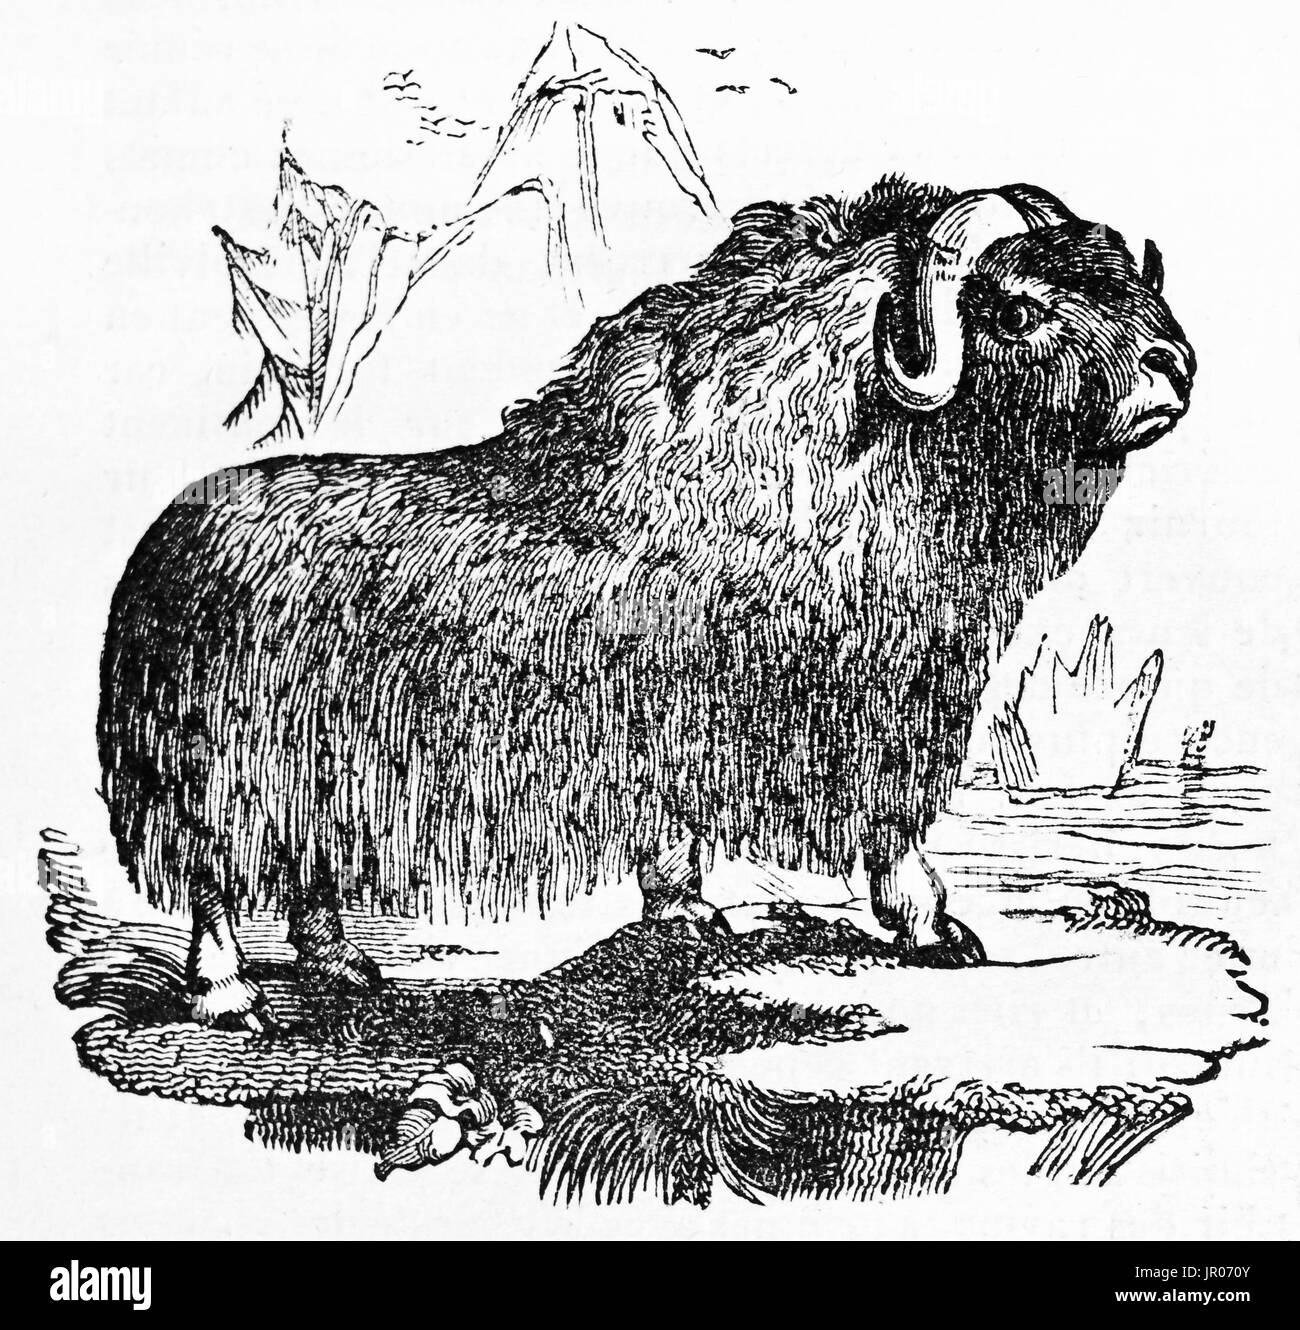 Old illustration of a Muskox (Ovibos moschatus). By unidentified author, published on Magasin Pittoresque, Paris, 1833. Stock Photo